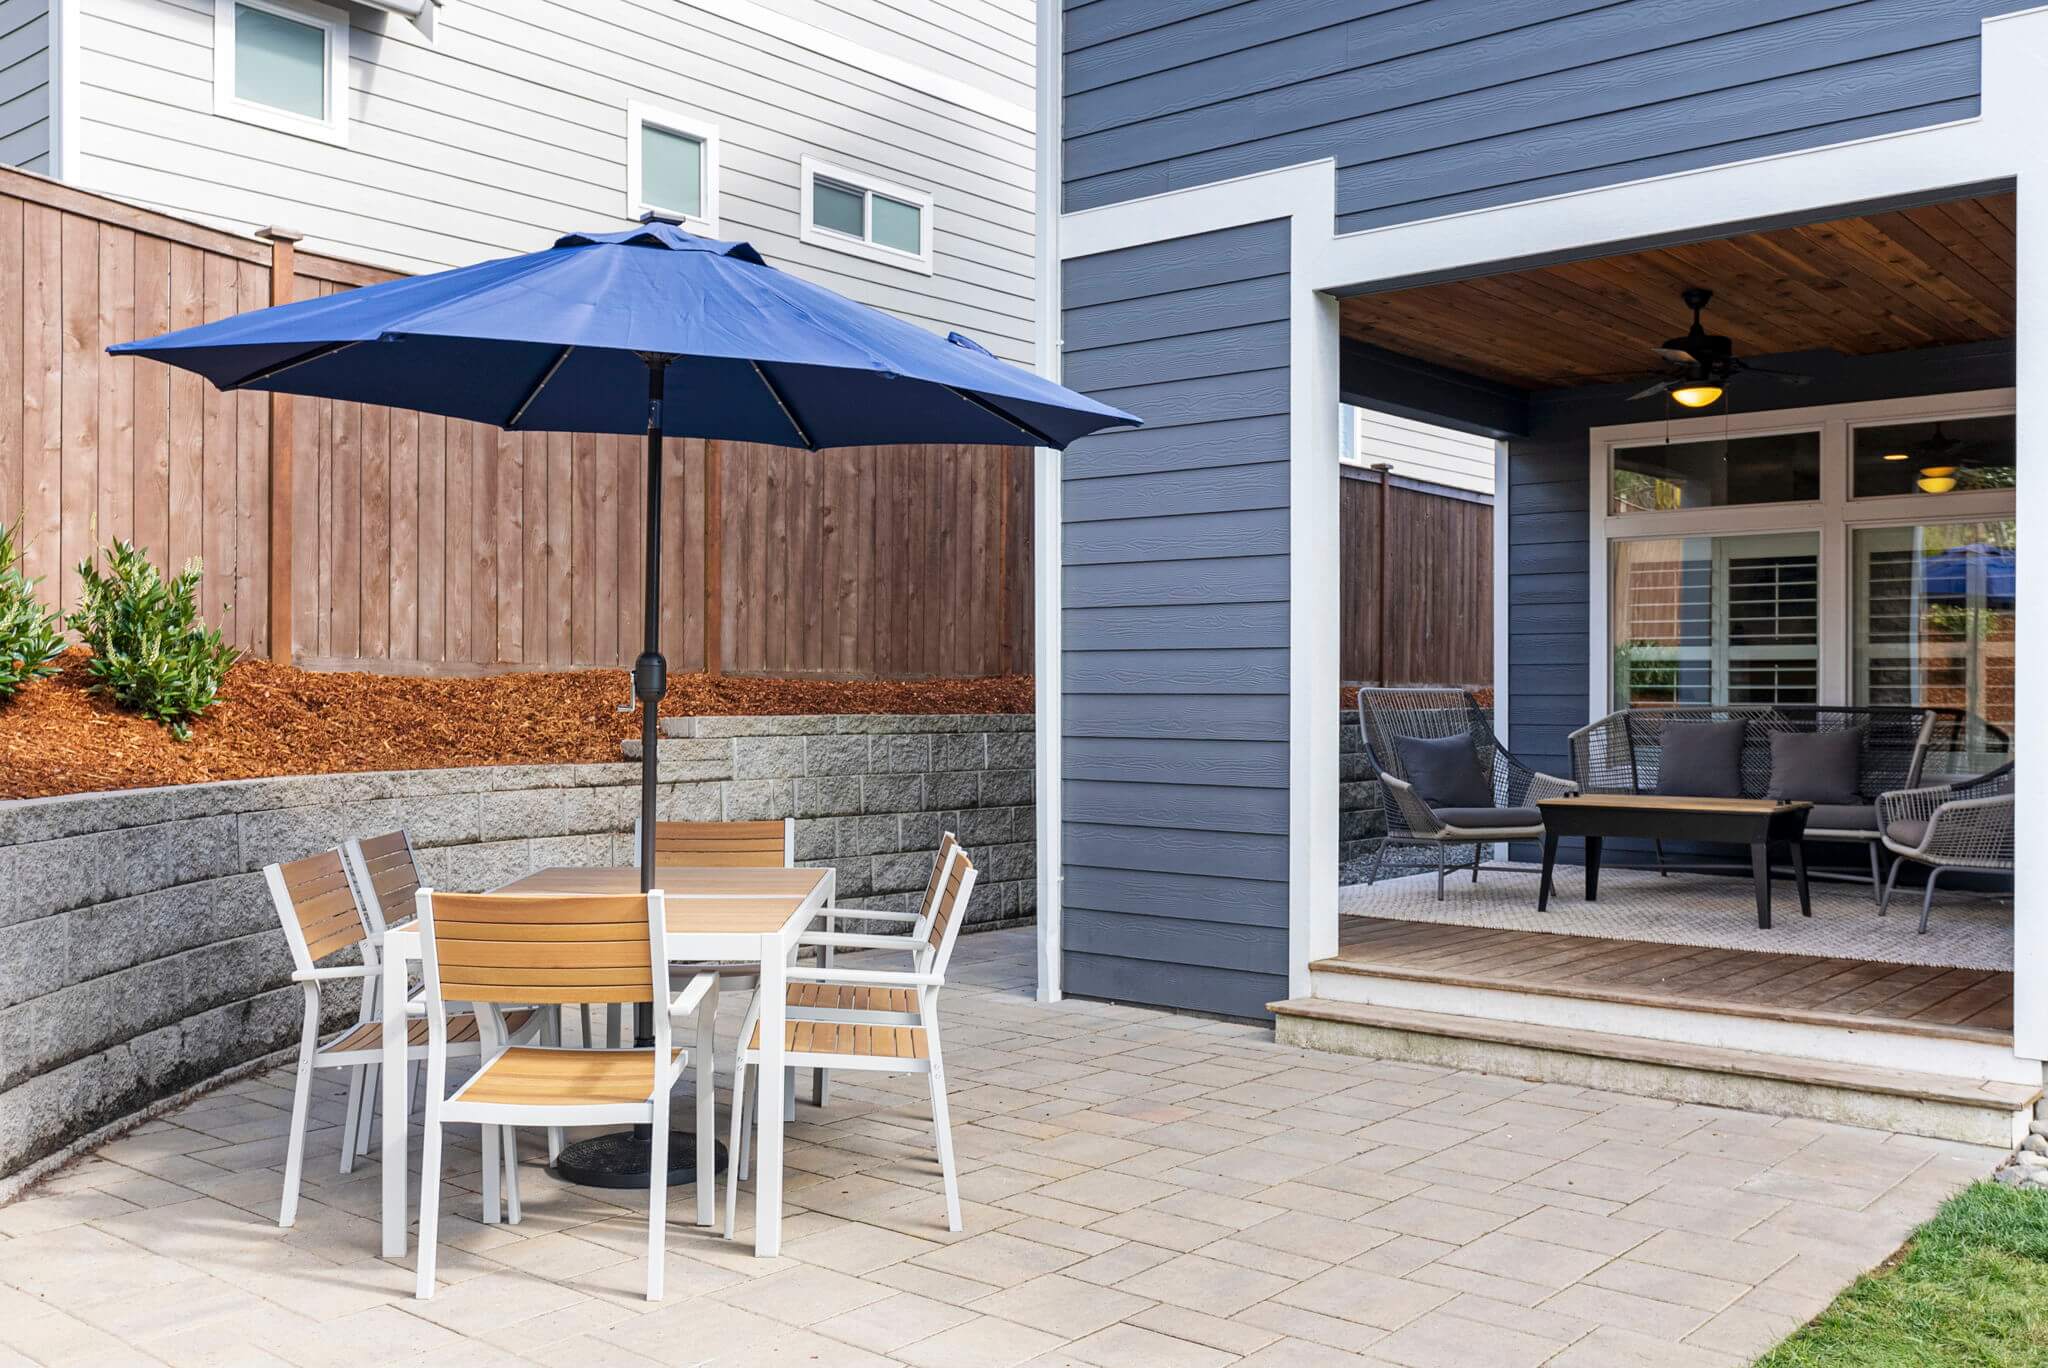 Patio offers great space for outdoor entertaining